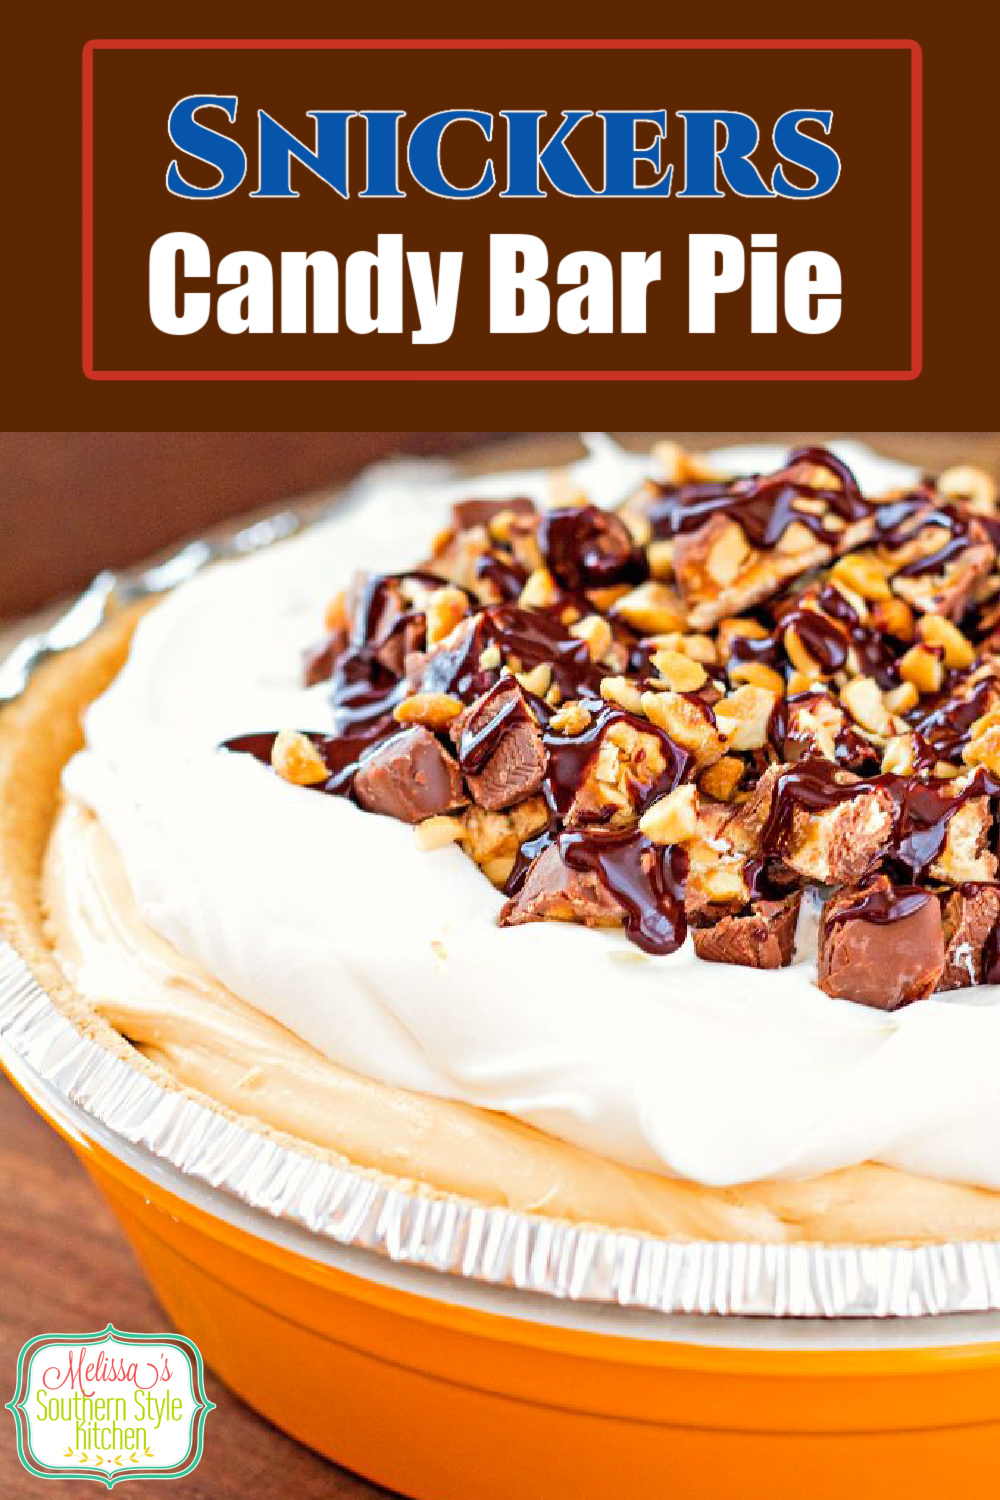 whip-up this no-bake Caramel Snickers Candy Bar Pie in minutes and satisfy your sweets craving #candybarpie #snickerspie #nobakepie #caramelsnickerspie #nobakepierecipes #pies #easydesserts #dessertfoodrecipes #sweets #easypies via @melissasssk